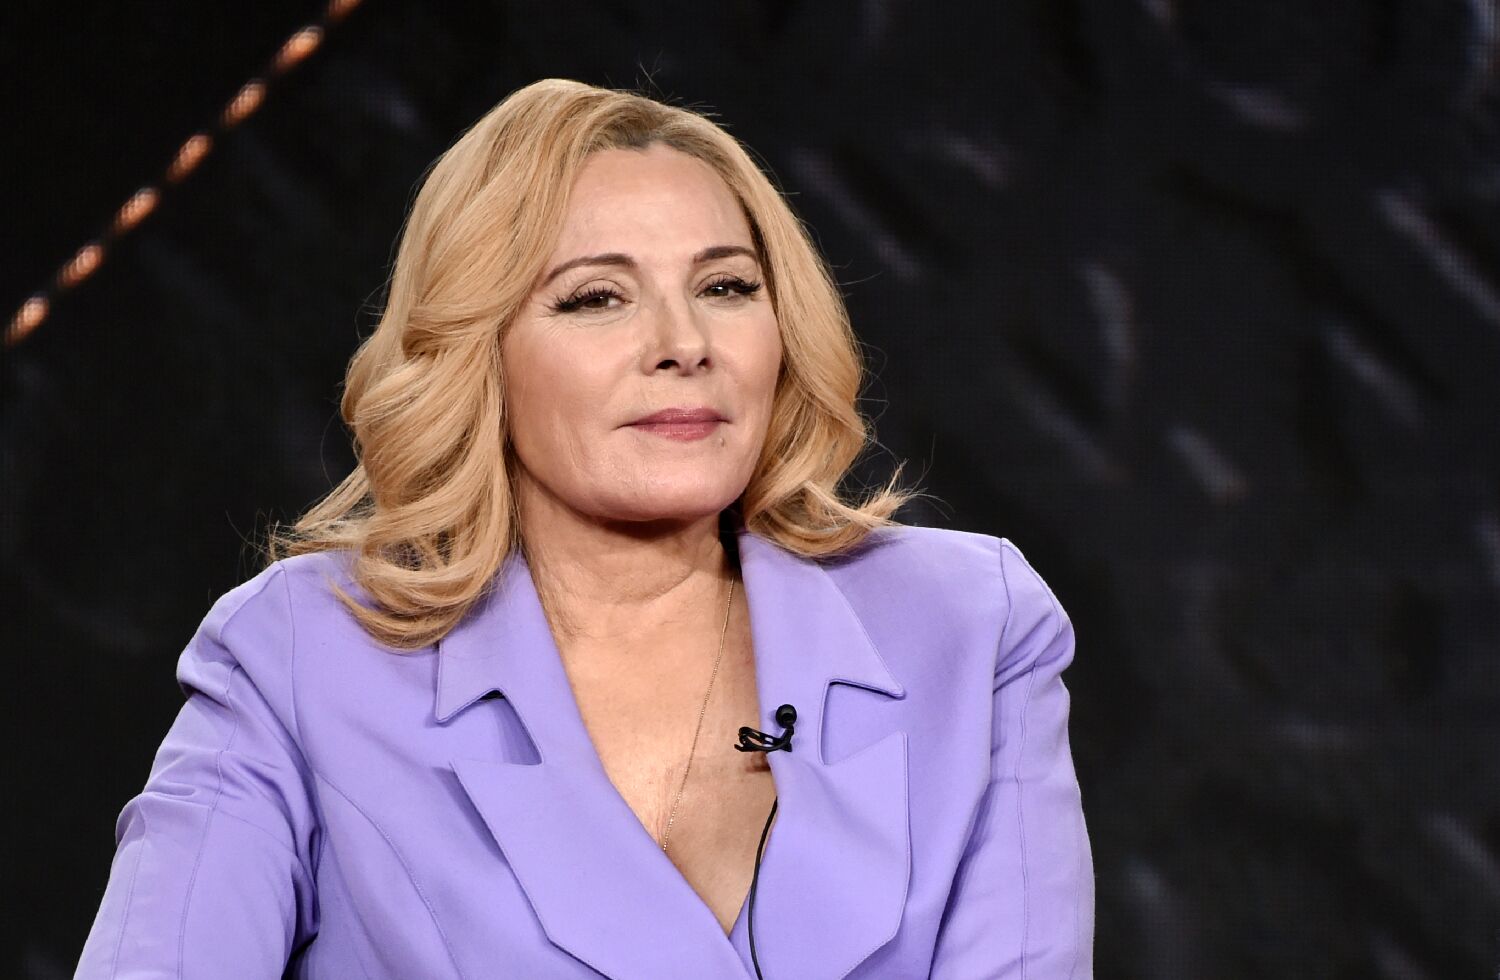 Kim Cattrall agreed to 'And Just Like That' gig if Max pulled off this 'SATC' reunion